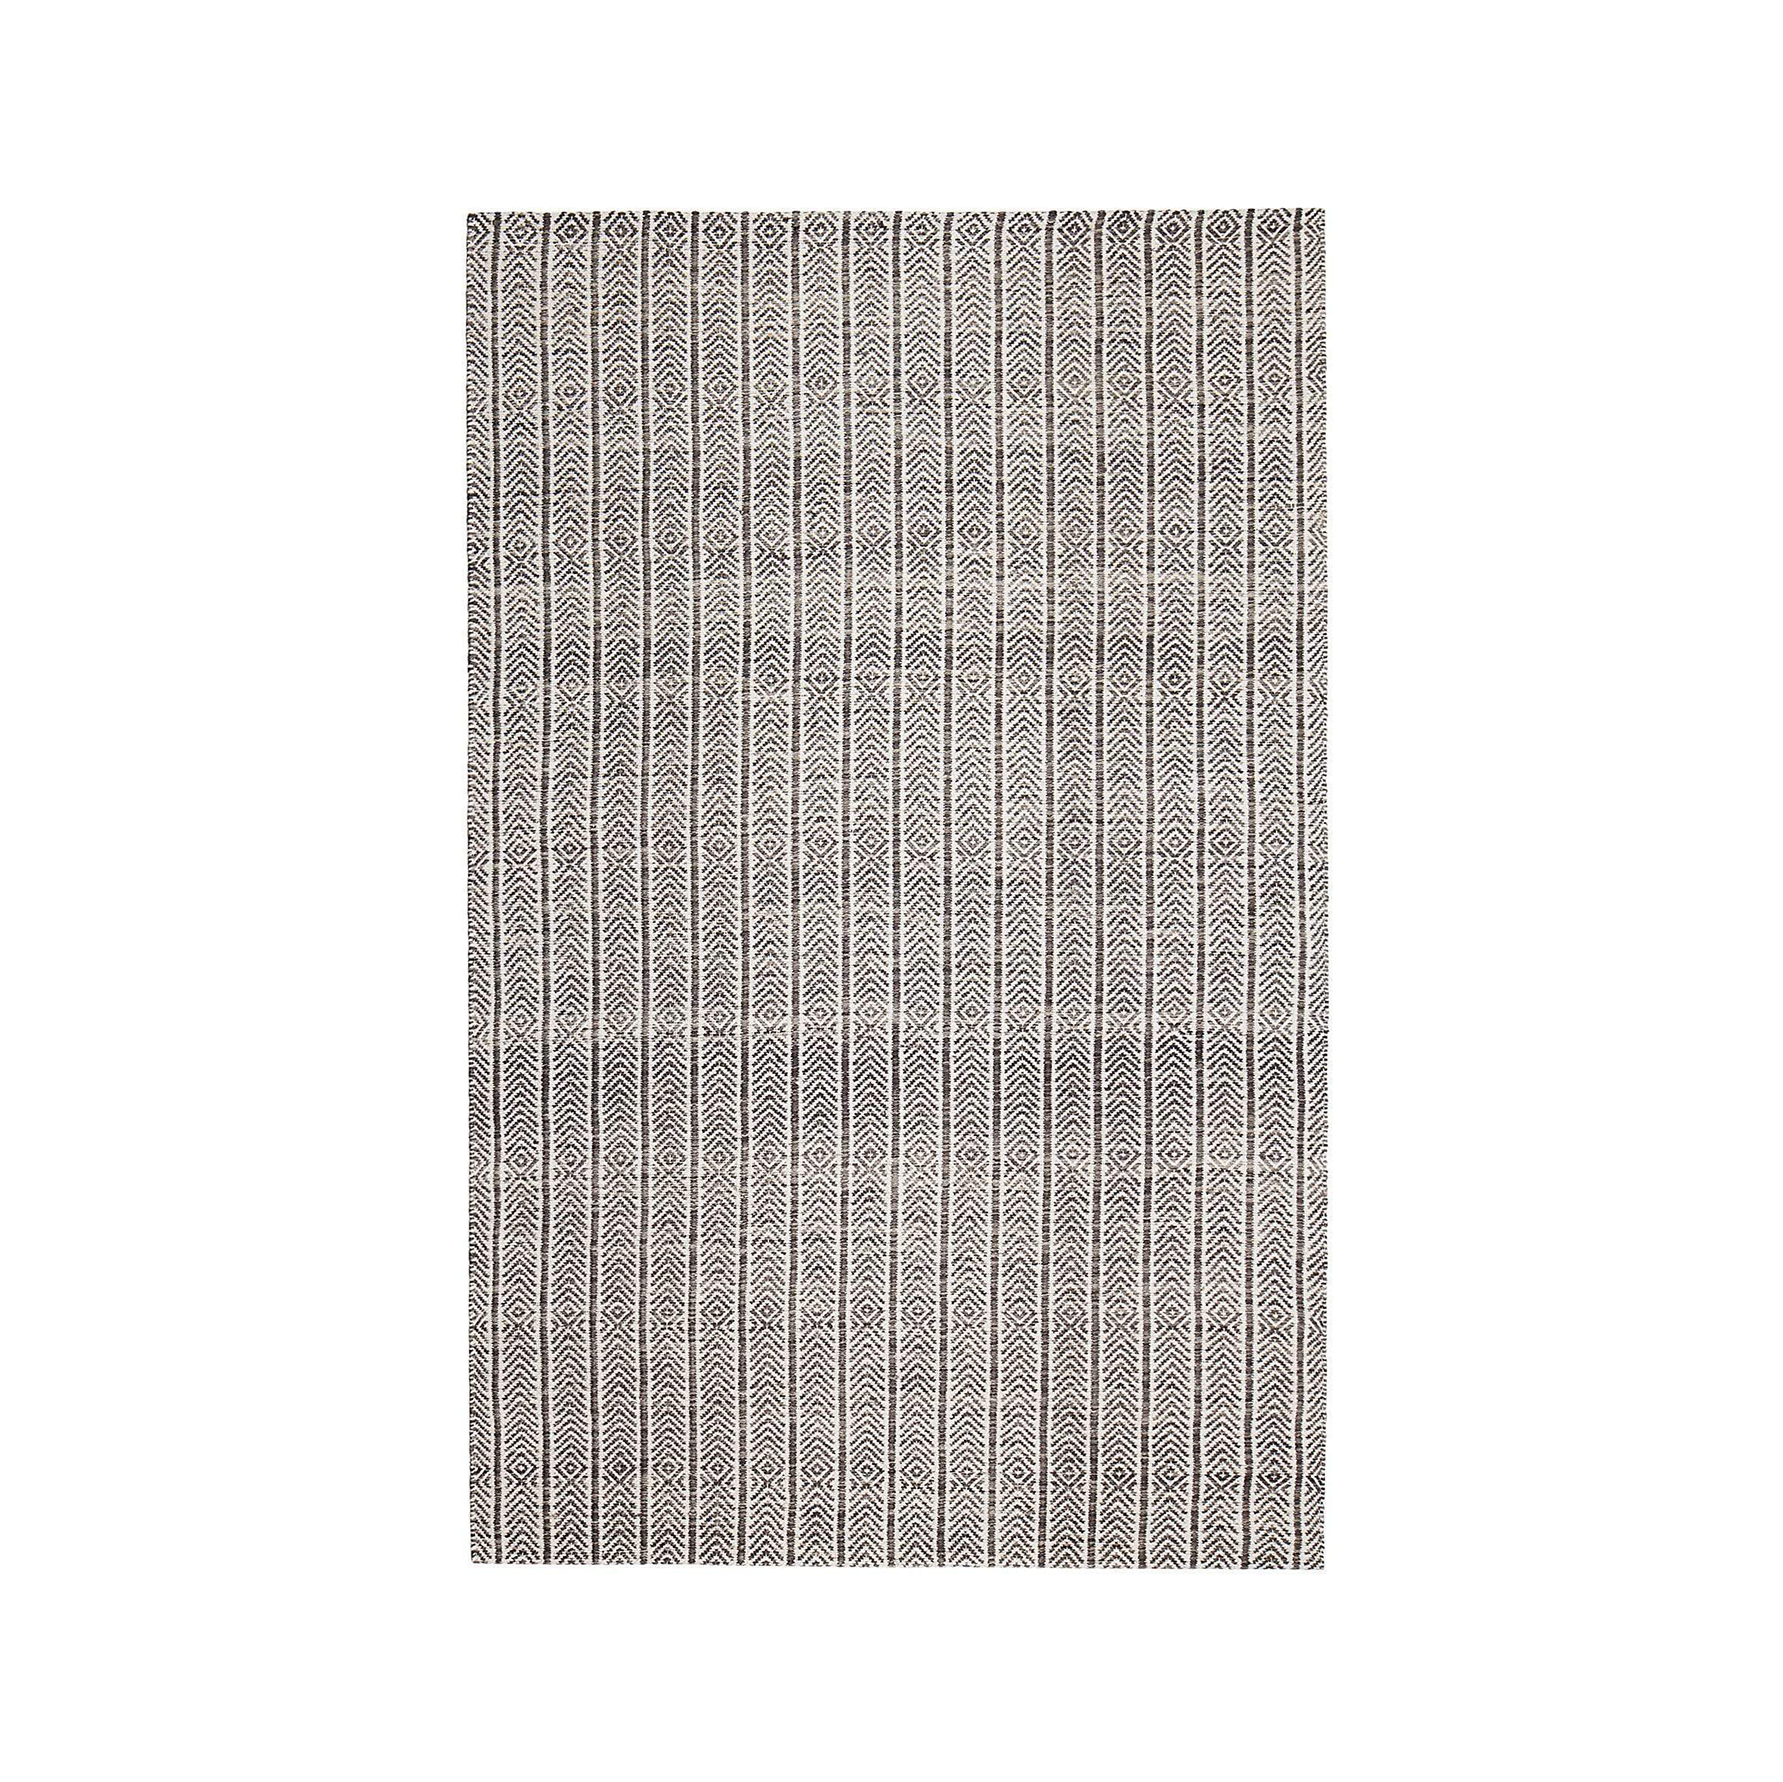 6 Month Rental Plan | Tribal 8x10 Rug | From $110/mo